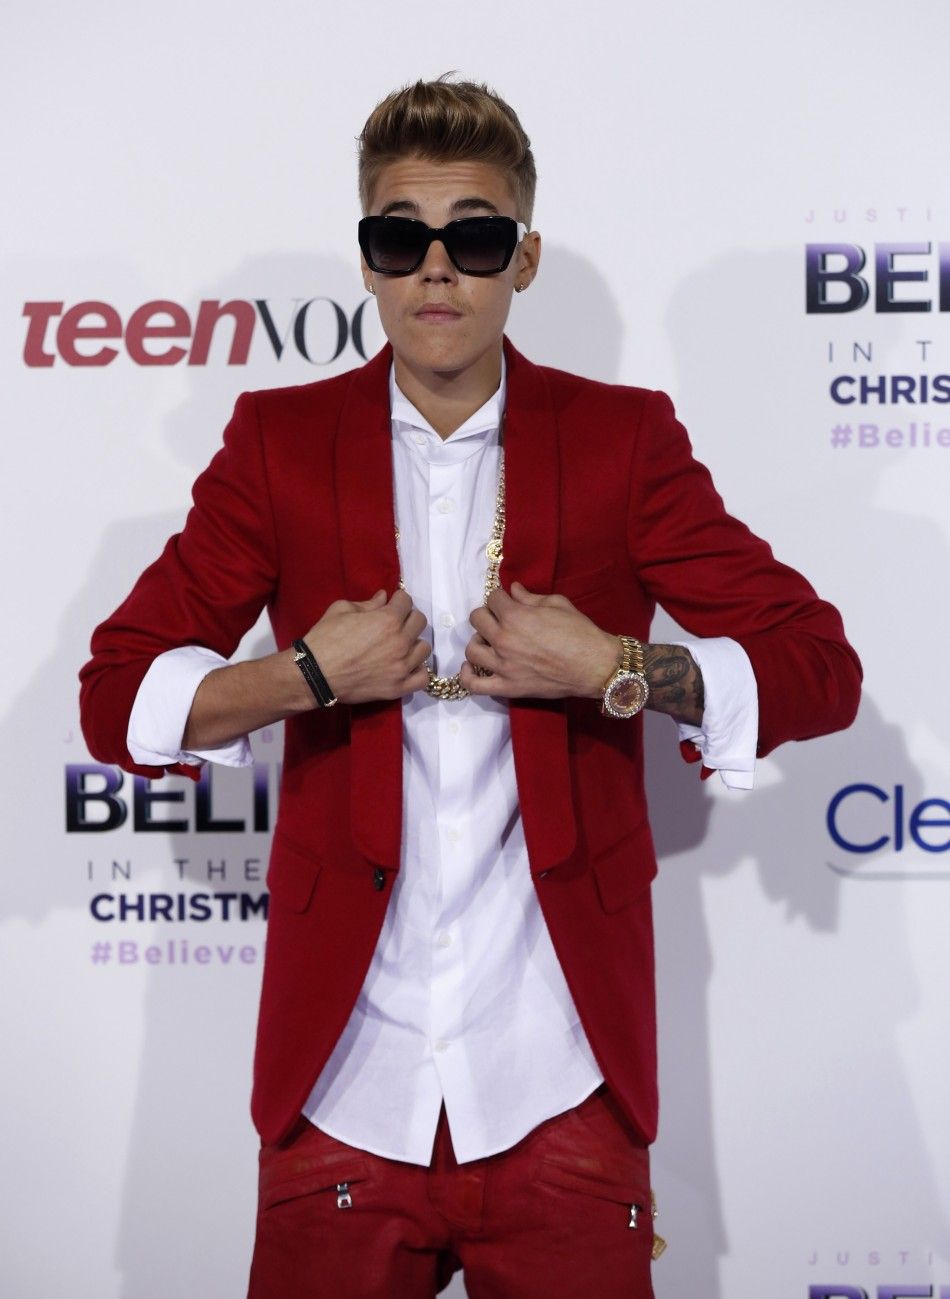 File photo of singer Bieber posing at the premiere of the documentary quotJustin Biebers Believequot in Los Angeles